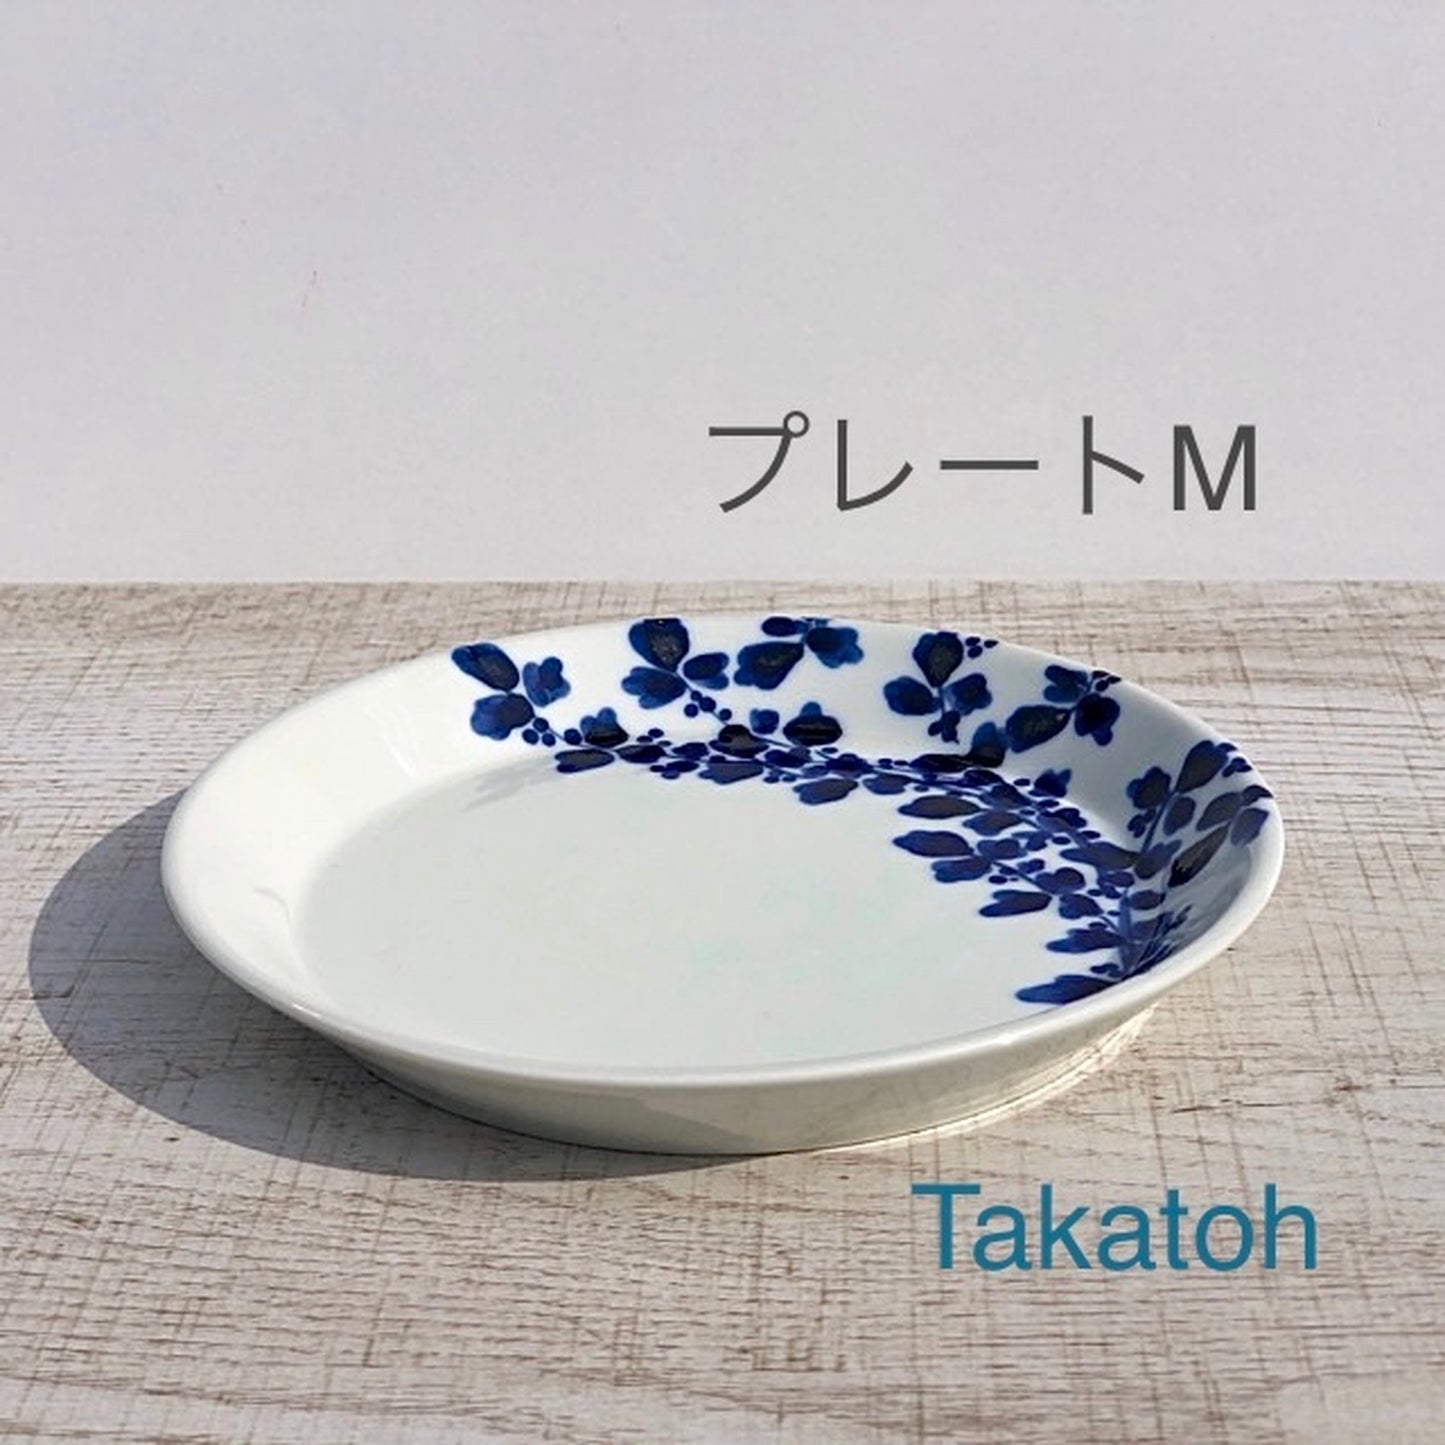 [Hasami ware] [Nakazen] [Arabesque] [Plate M] 16.3cm plant arabesque pattern hand-painted plate cake plate Hasami ware fashionable adult colorful cute